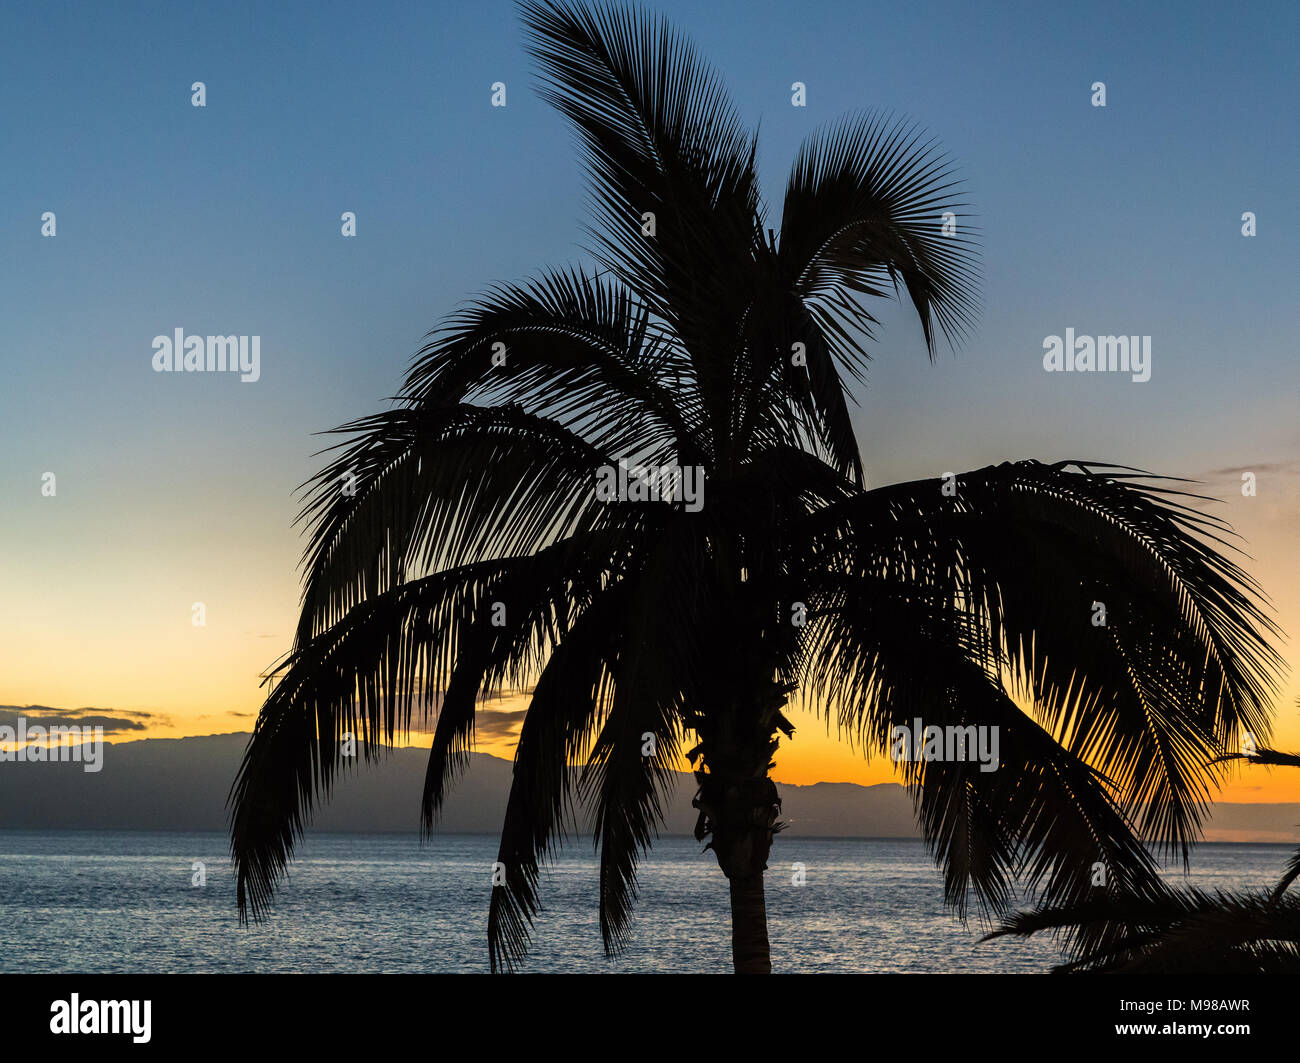 Palm tree silhoutte at warm and colorful ( colourful ) evening sunset in Tenerife, Canary Islands. Stock Photo